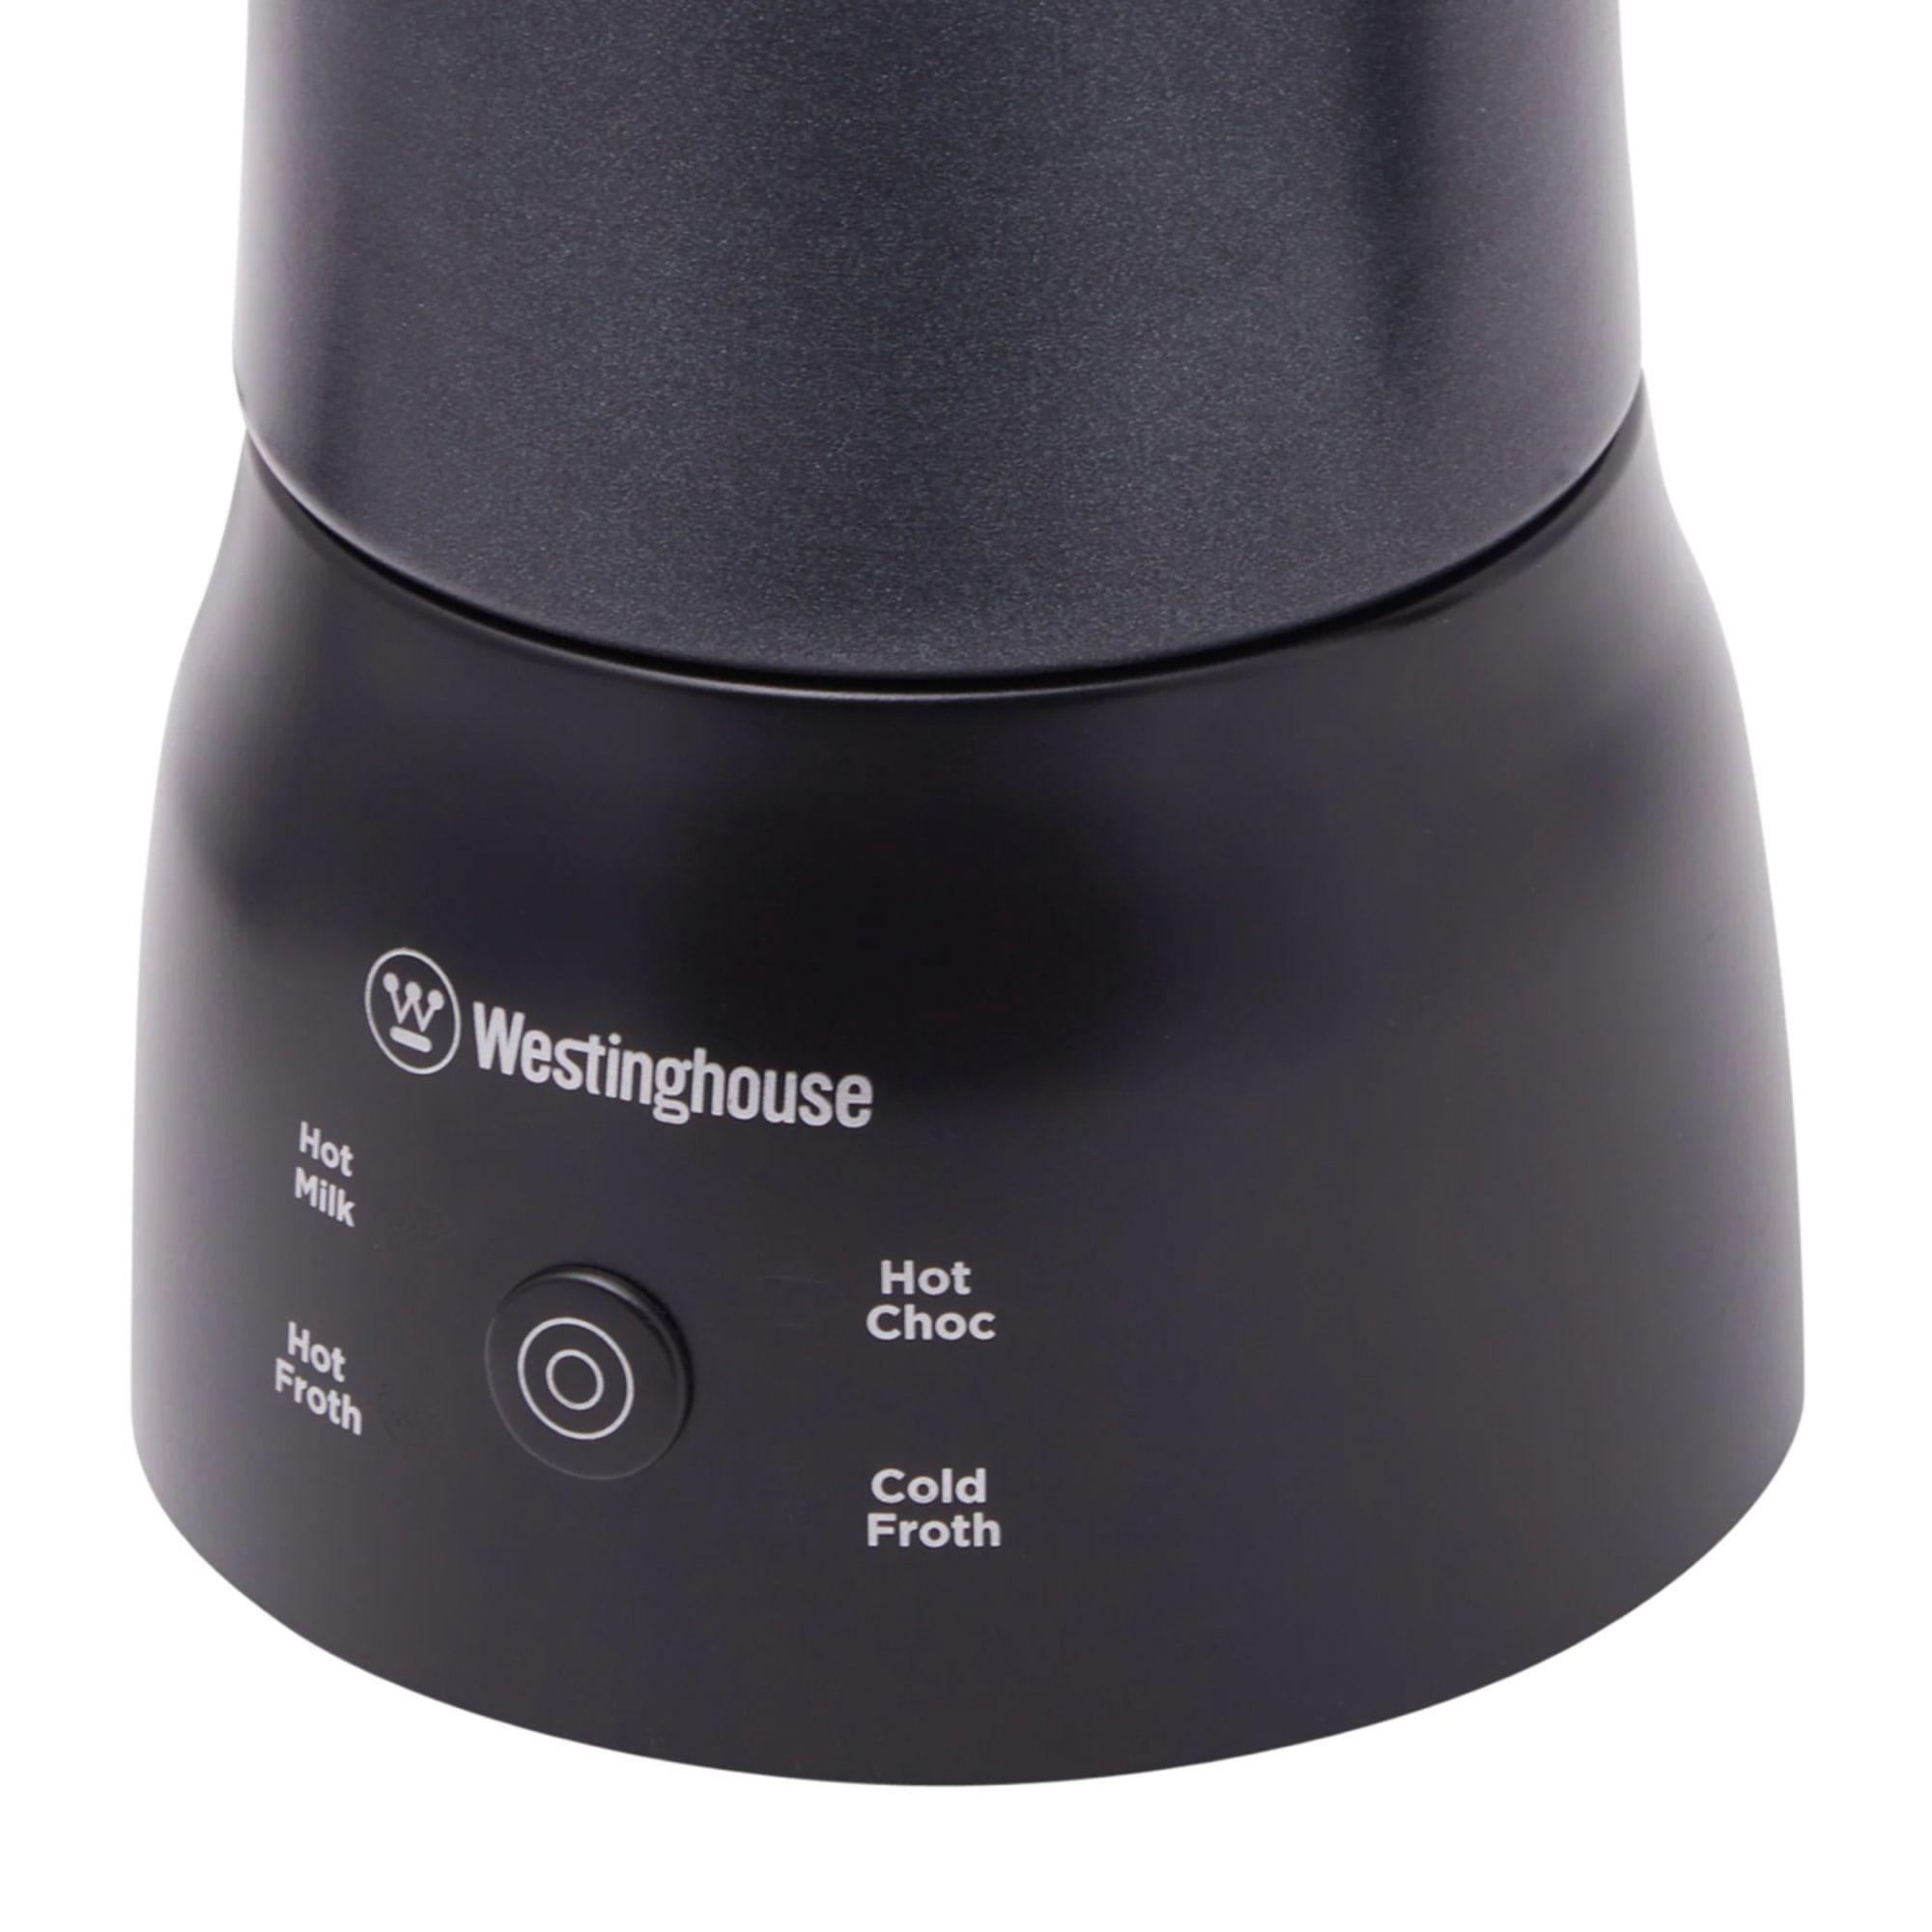 Westinghouse Milk Frother Black Image 5